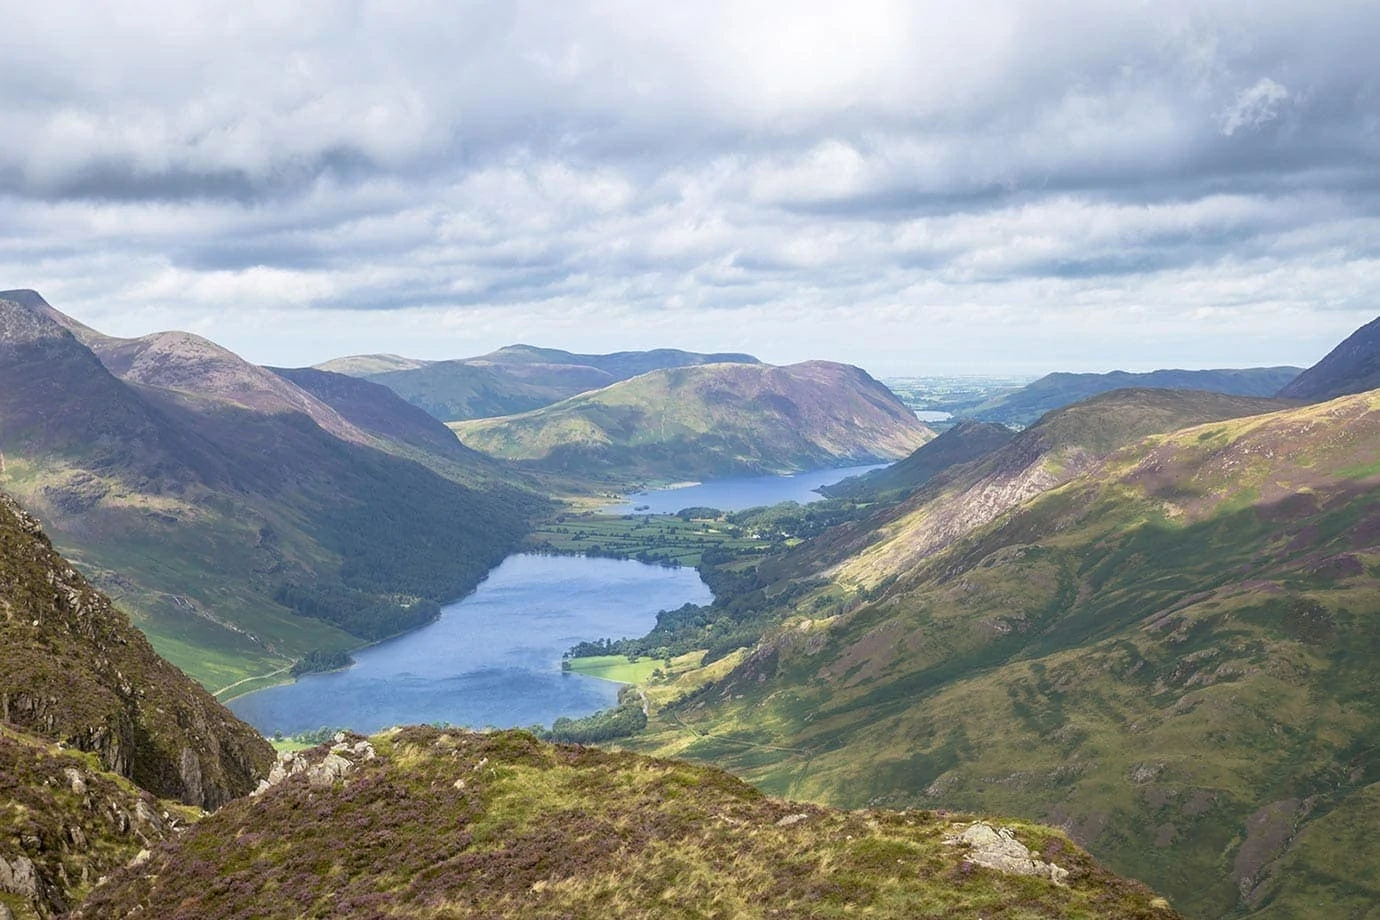 16 Photos That'll Make You Want to Visit the Lake District